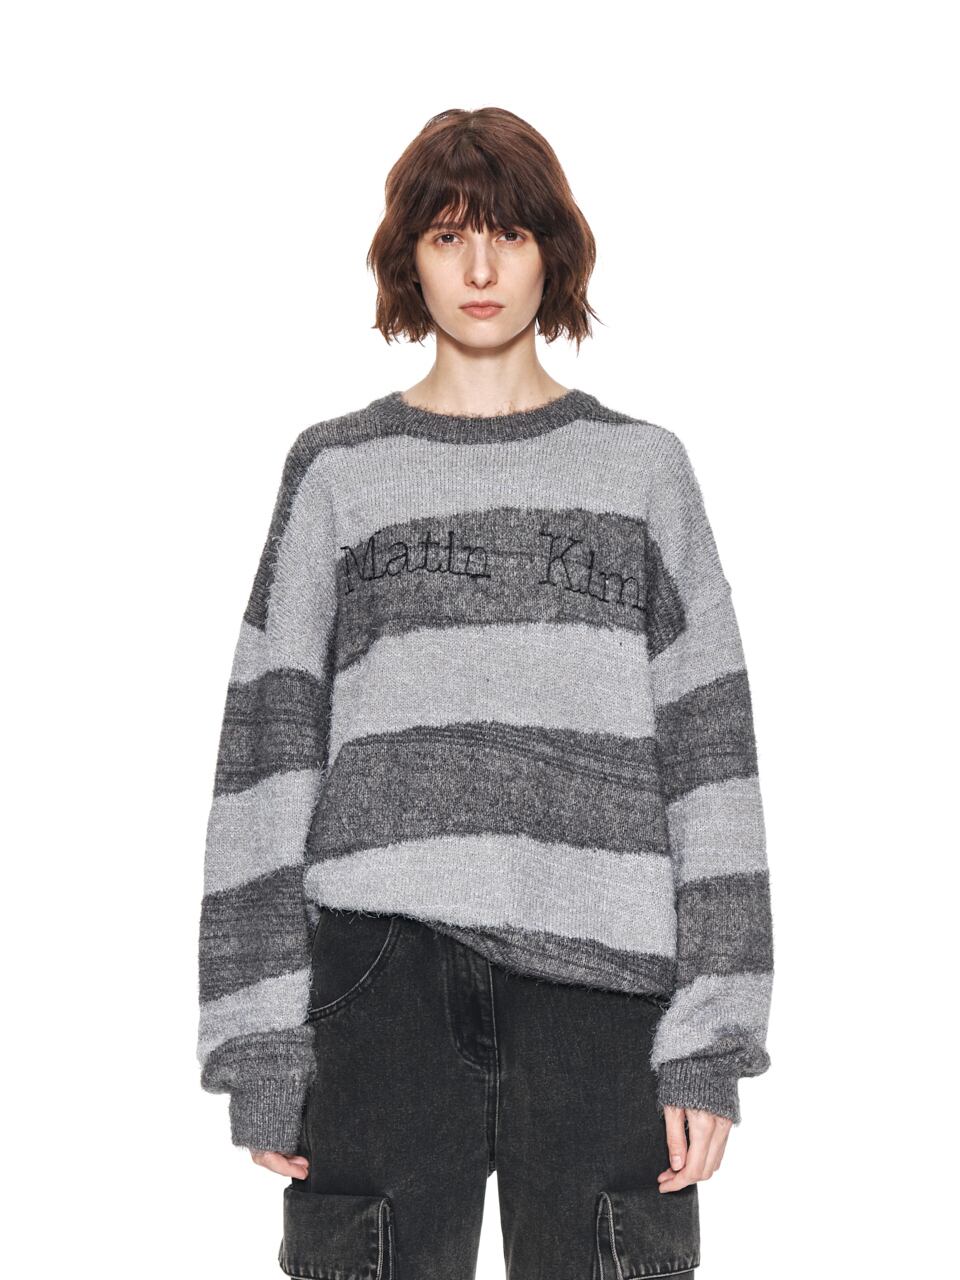 Matin Kim] STRIPE SNOWBALL KNIT PULLOVER IN CHARCOAL 正規品 韓国